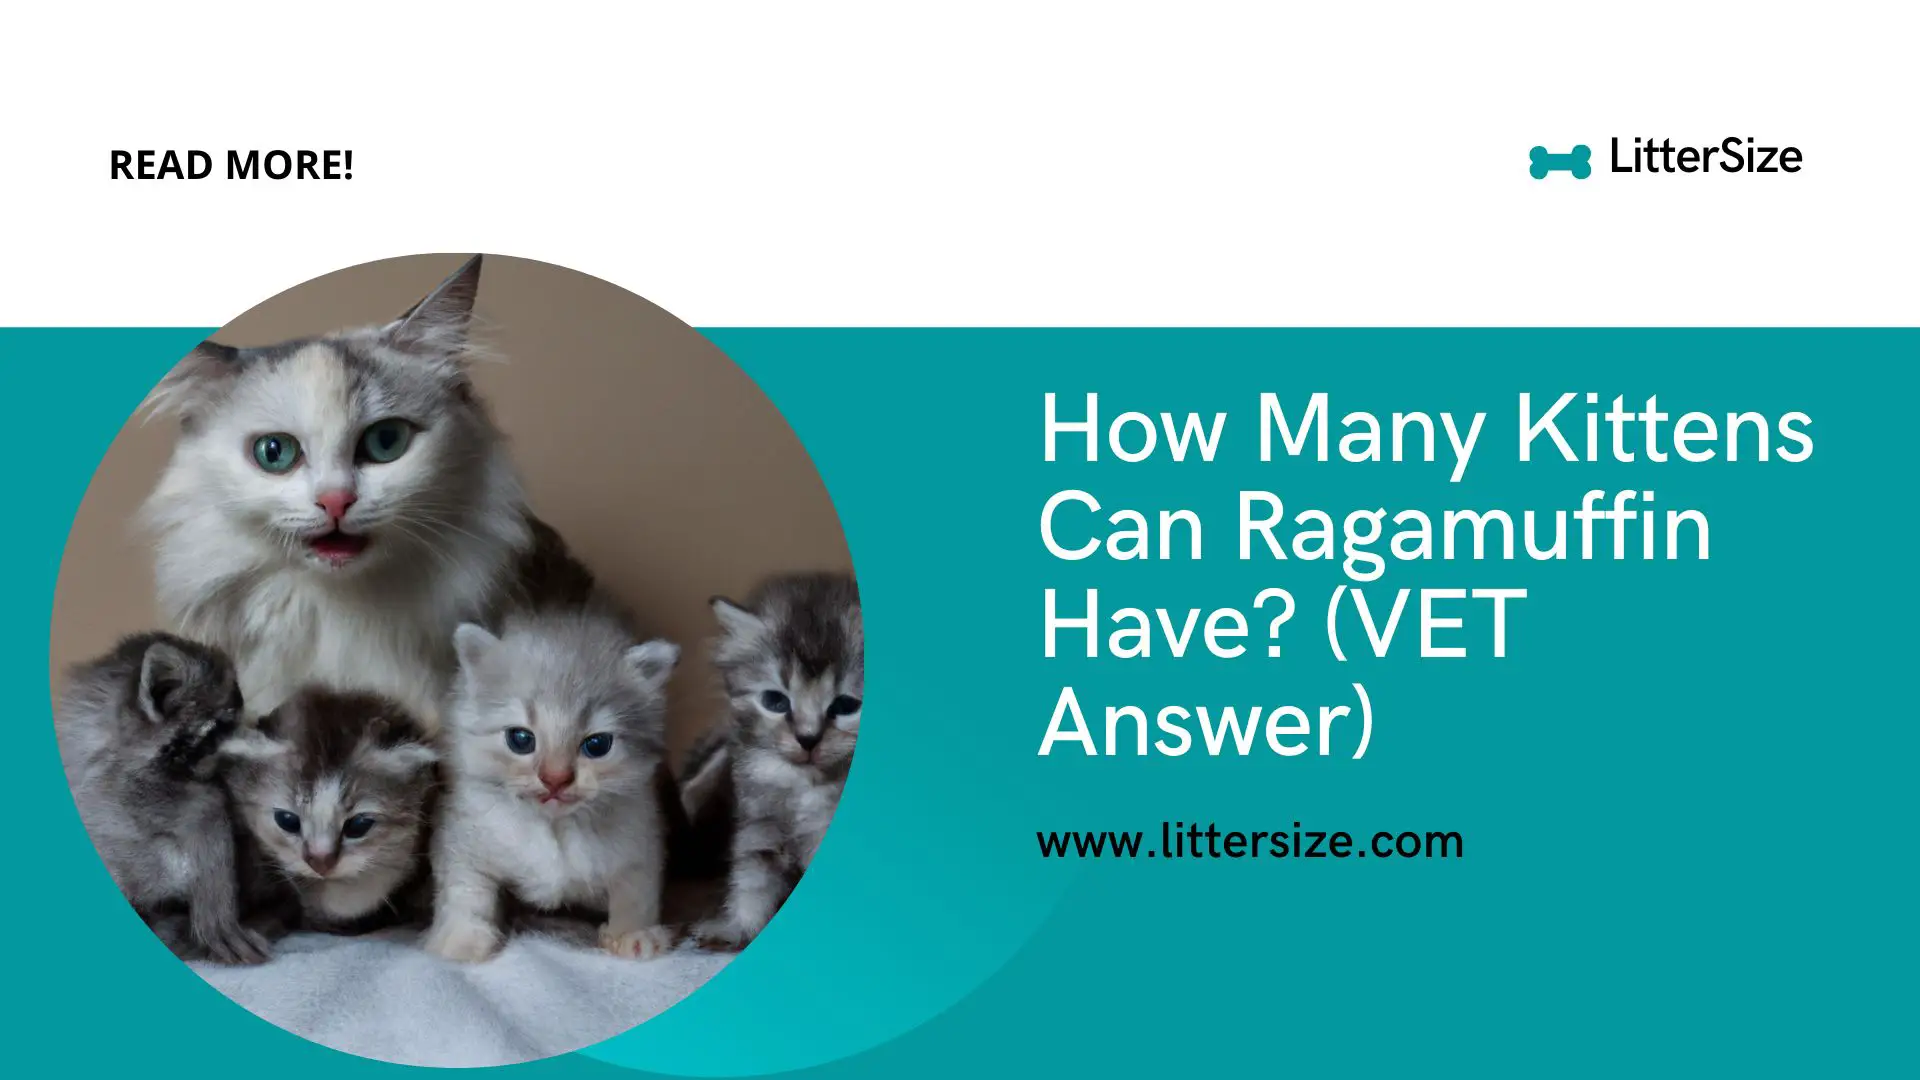 How Many Kittens Can Ragamuffin Have? (VET Answer)